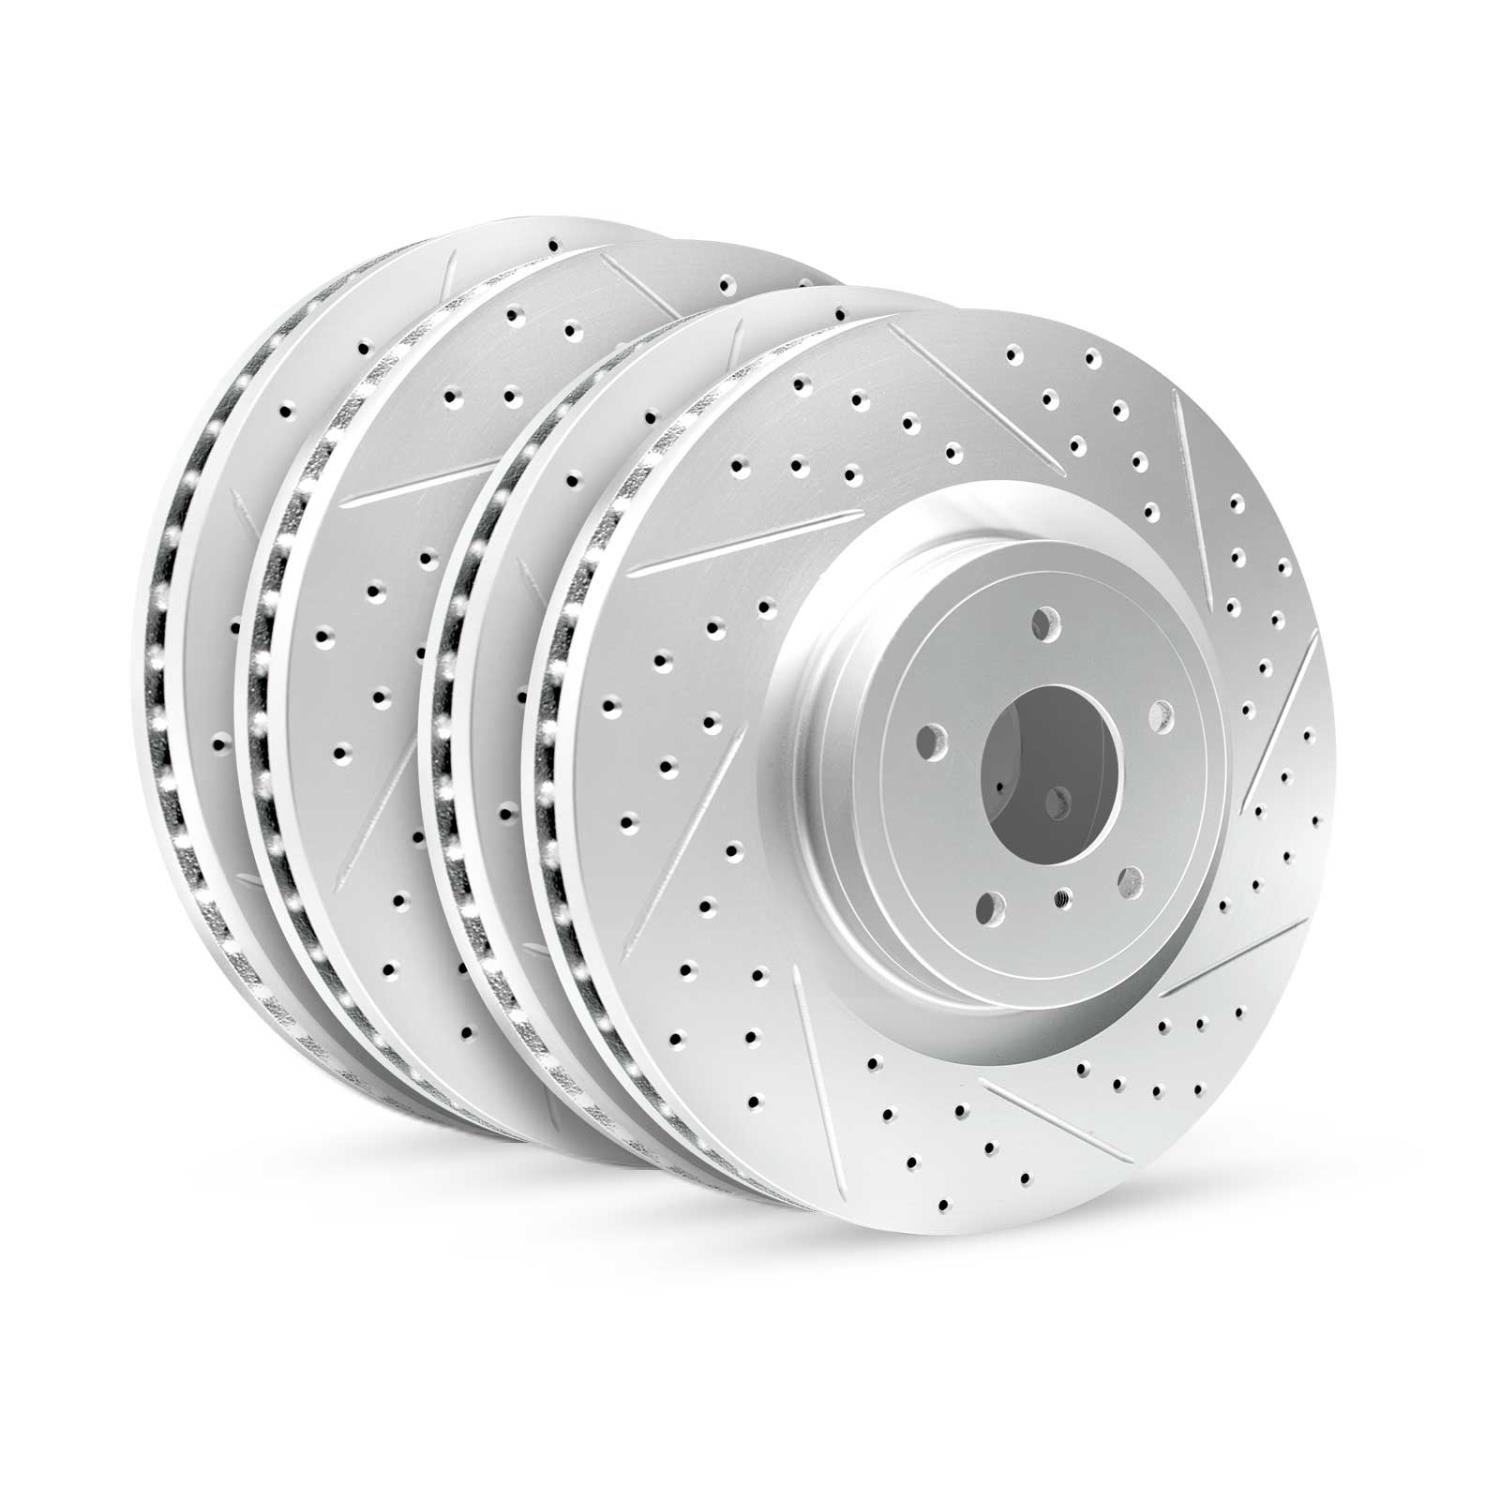 GEO-Carbon Drilled/Slotted Rotors, 1996-2005 BMW, Position: Front/Rear